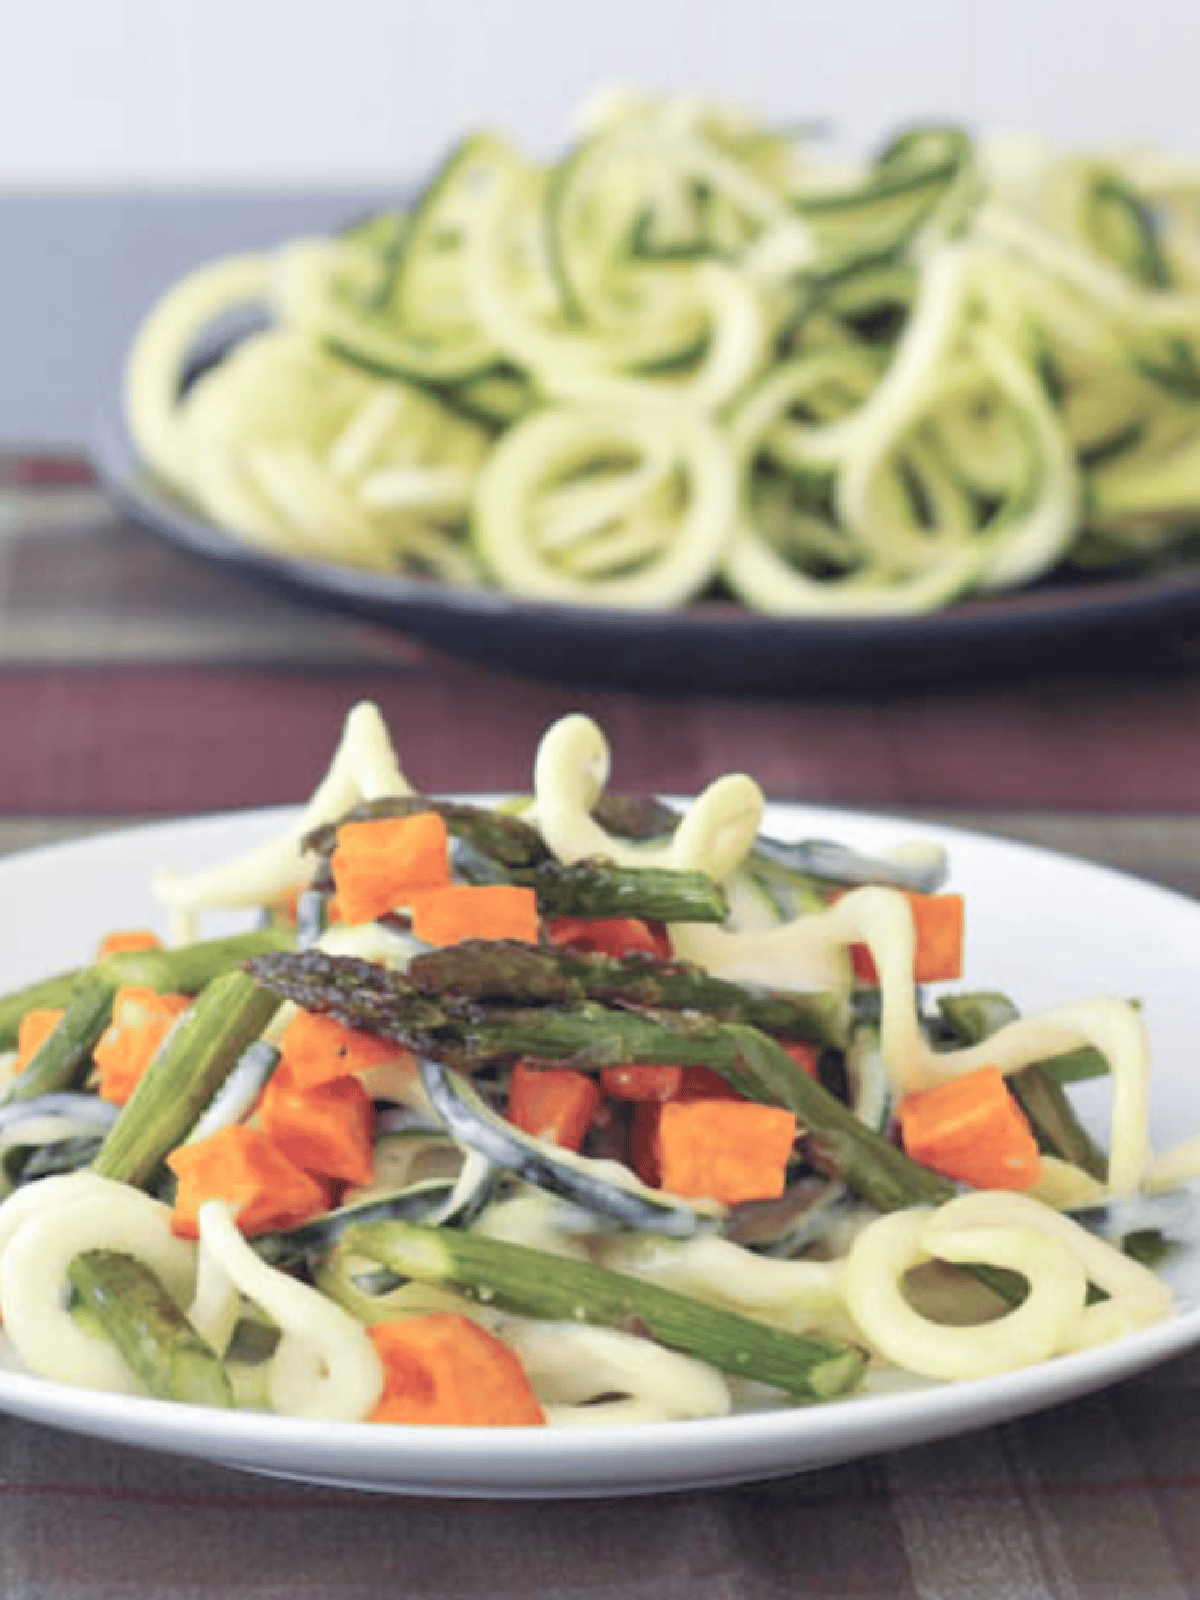 roasted sweet potato asparagus pasta using spiralized zucchini as noodles, on a white plate with a brown plaid tabletop, a side of zucchini spirals next to dish.